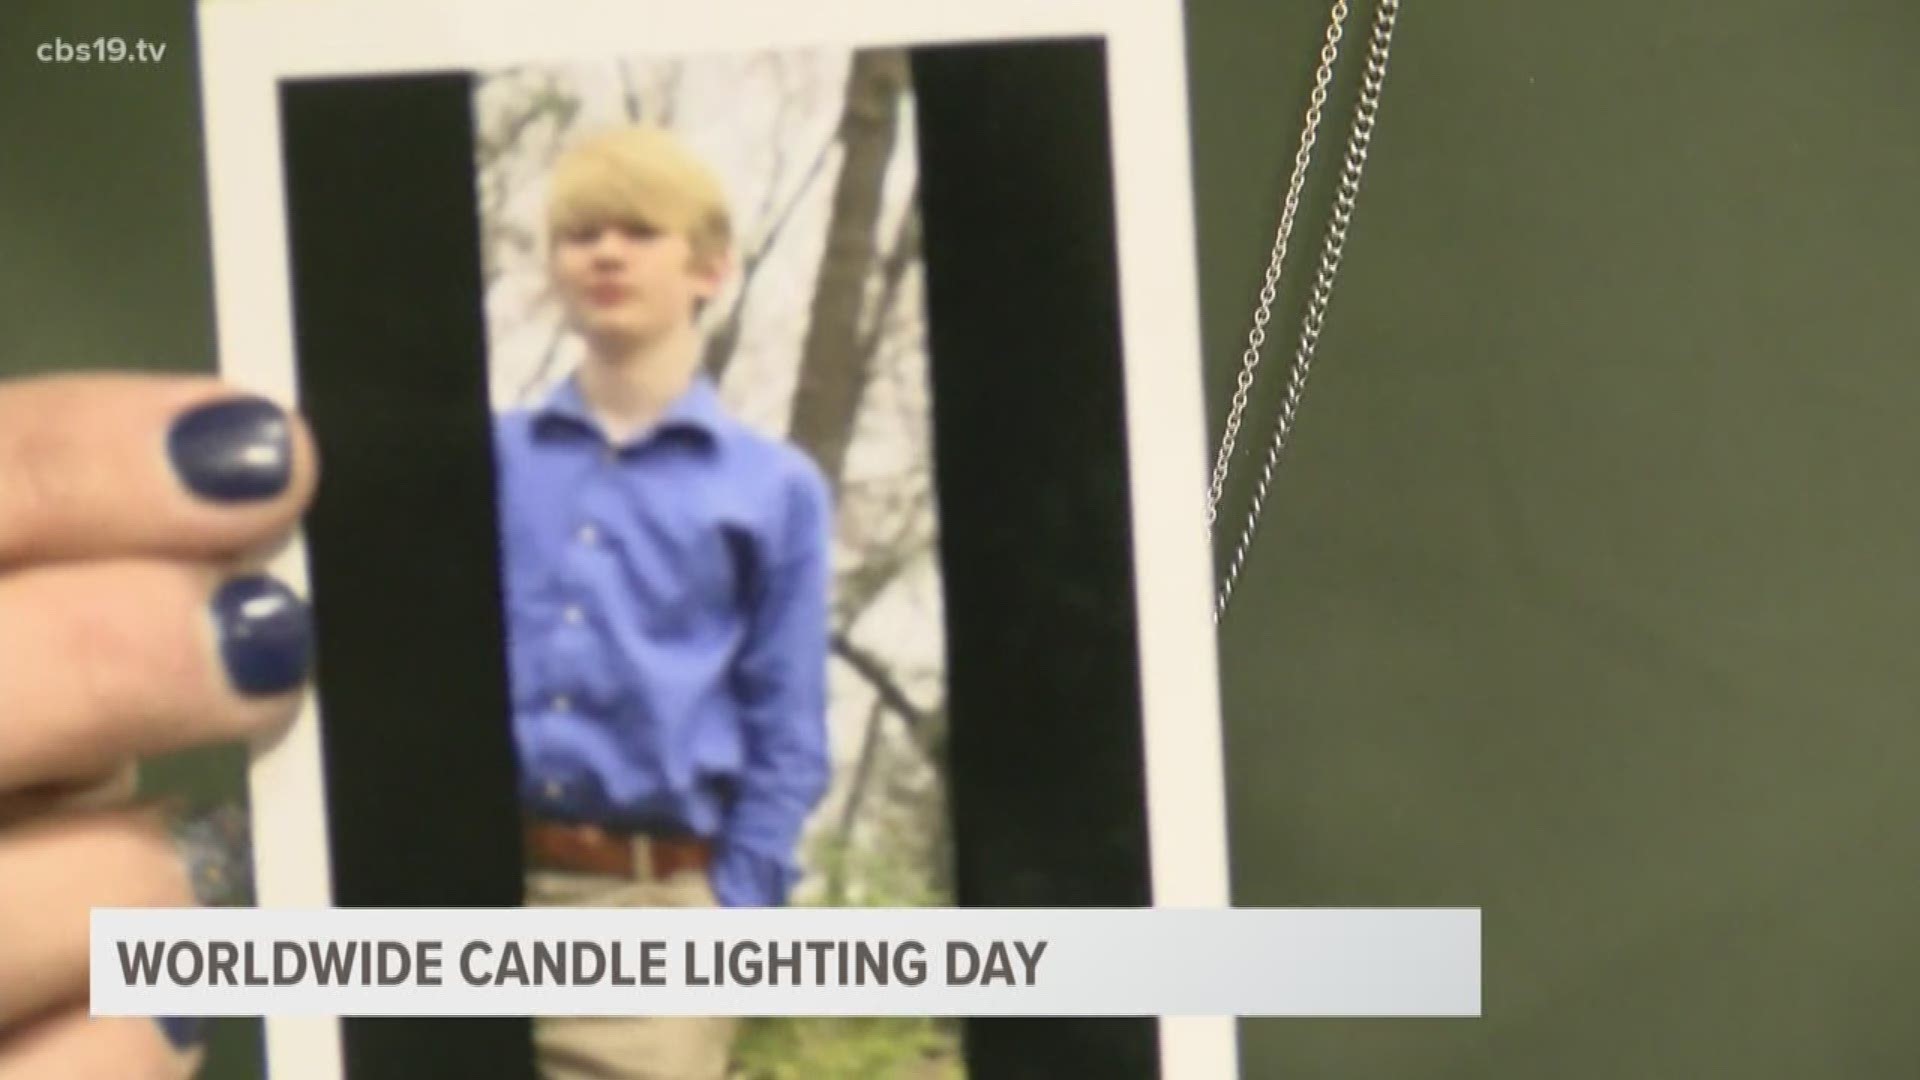 Families in Tyler lit a candle to commemorate those that have passed away.